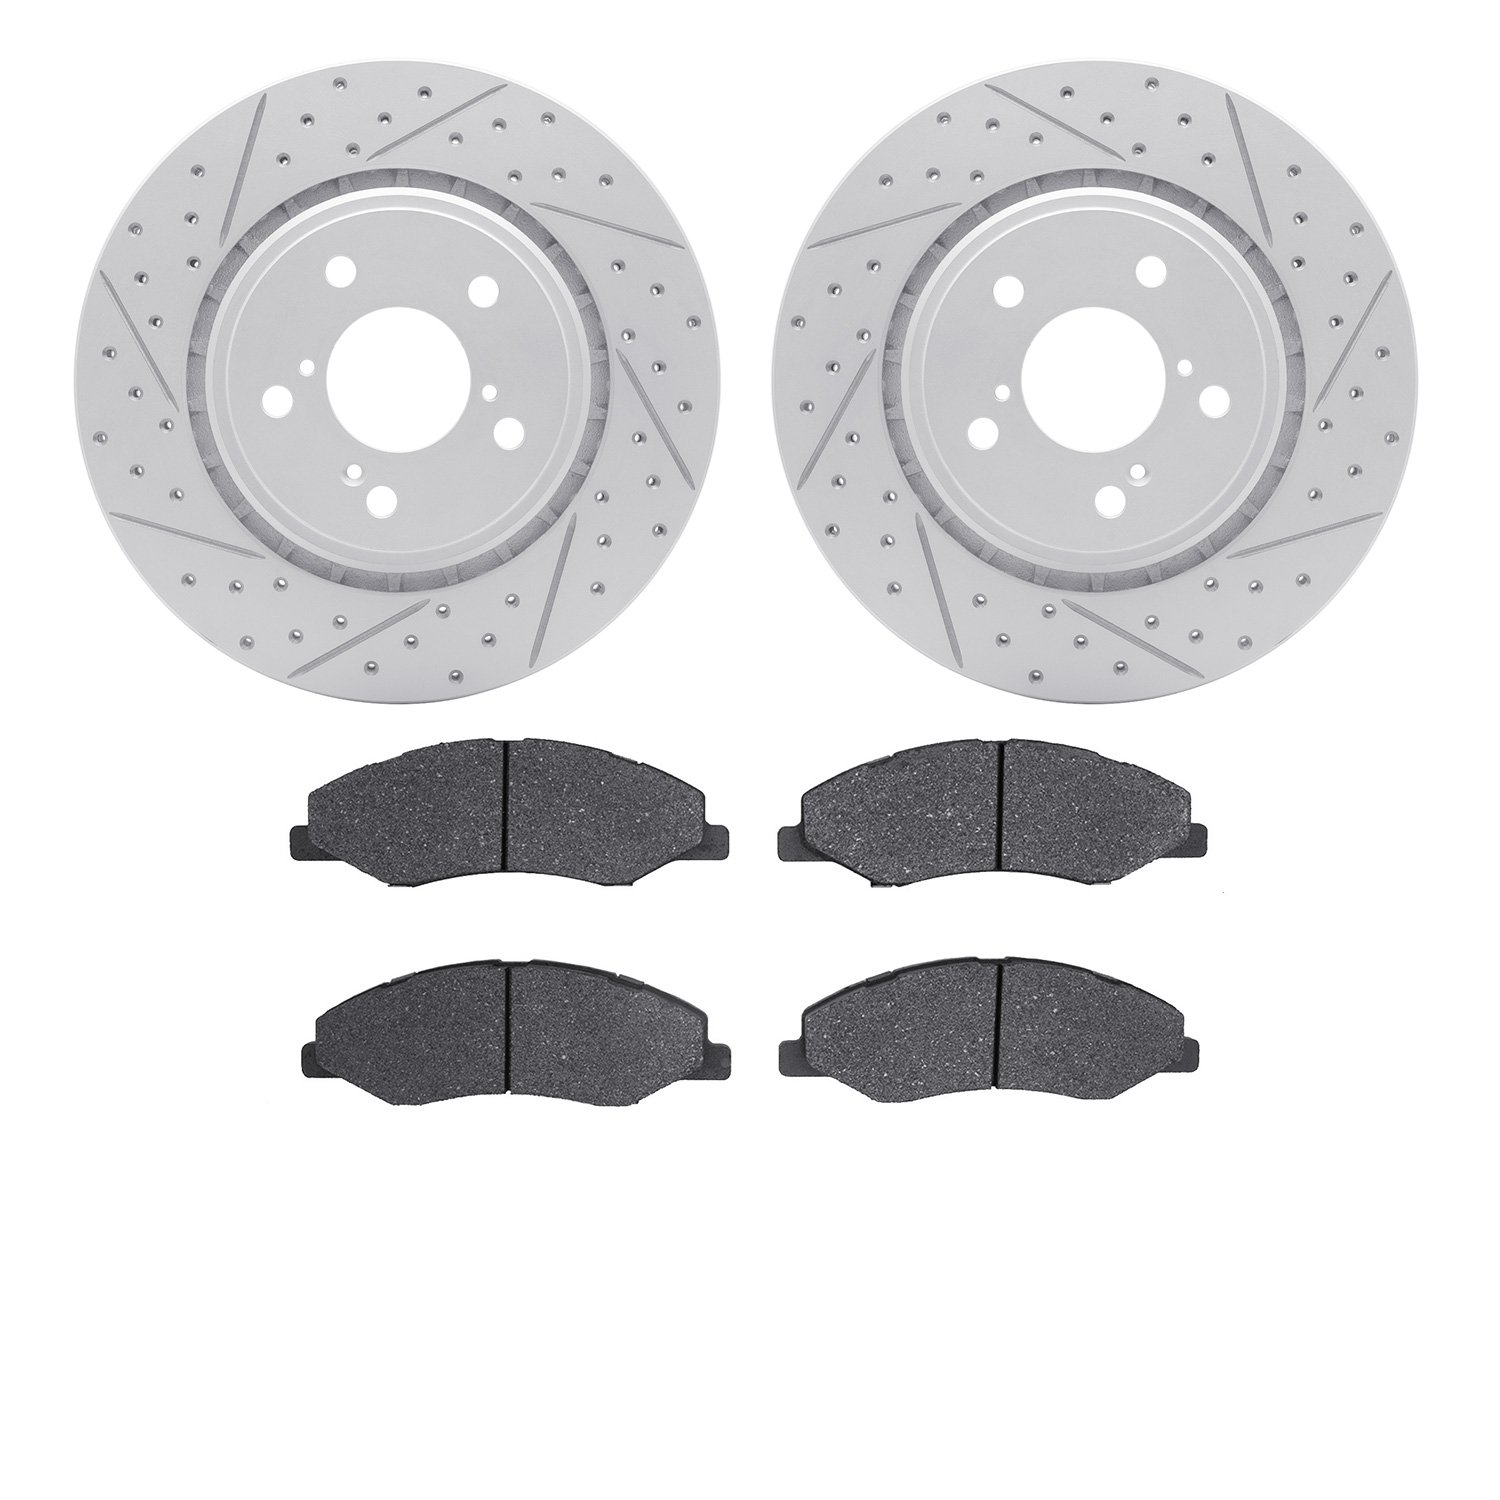 2502-59083 Geoperformance Drilled/Slotted Rotors w/5000 Advanced Brake Pads Kit, Fits Select Acura/Honda, Position: Front